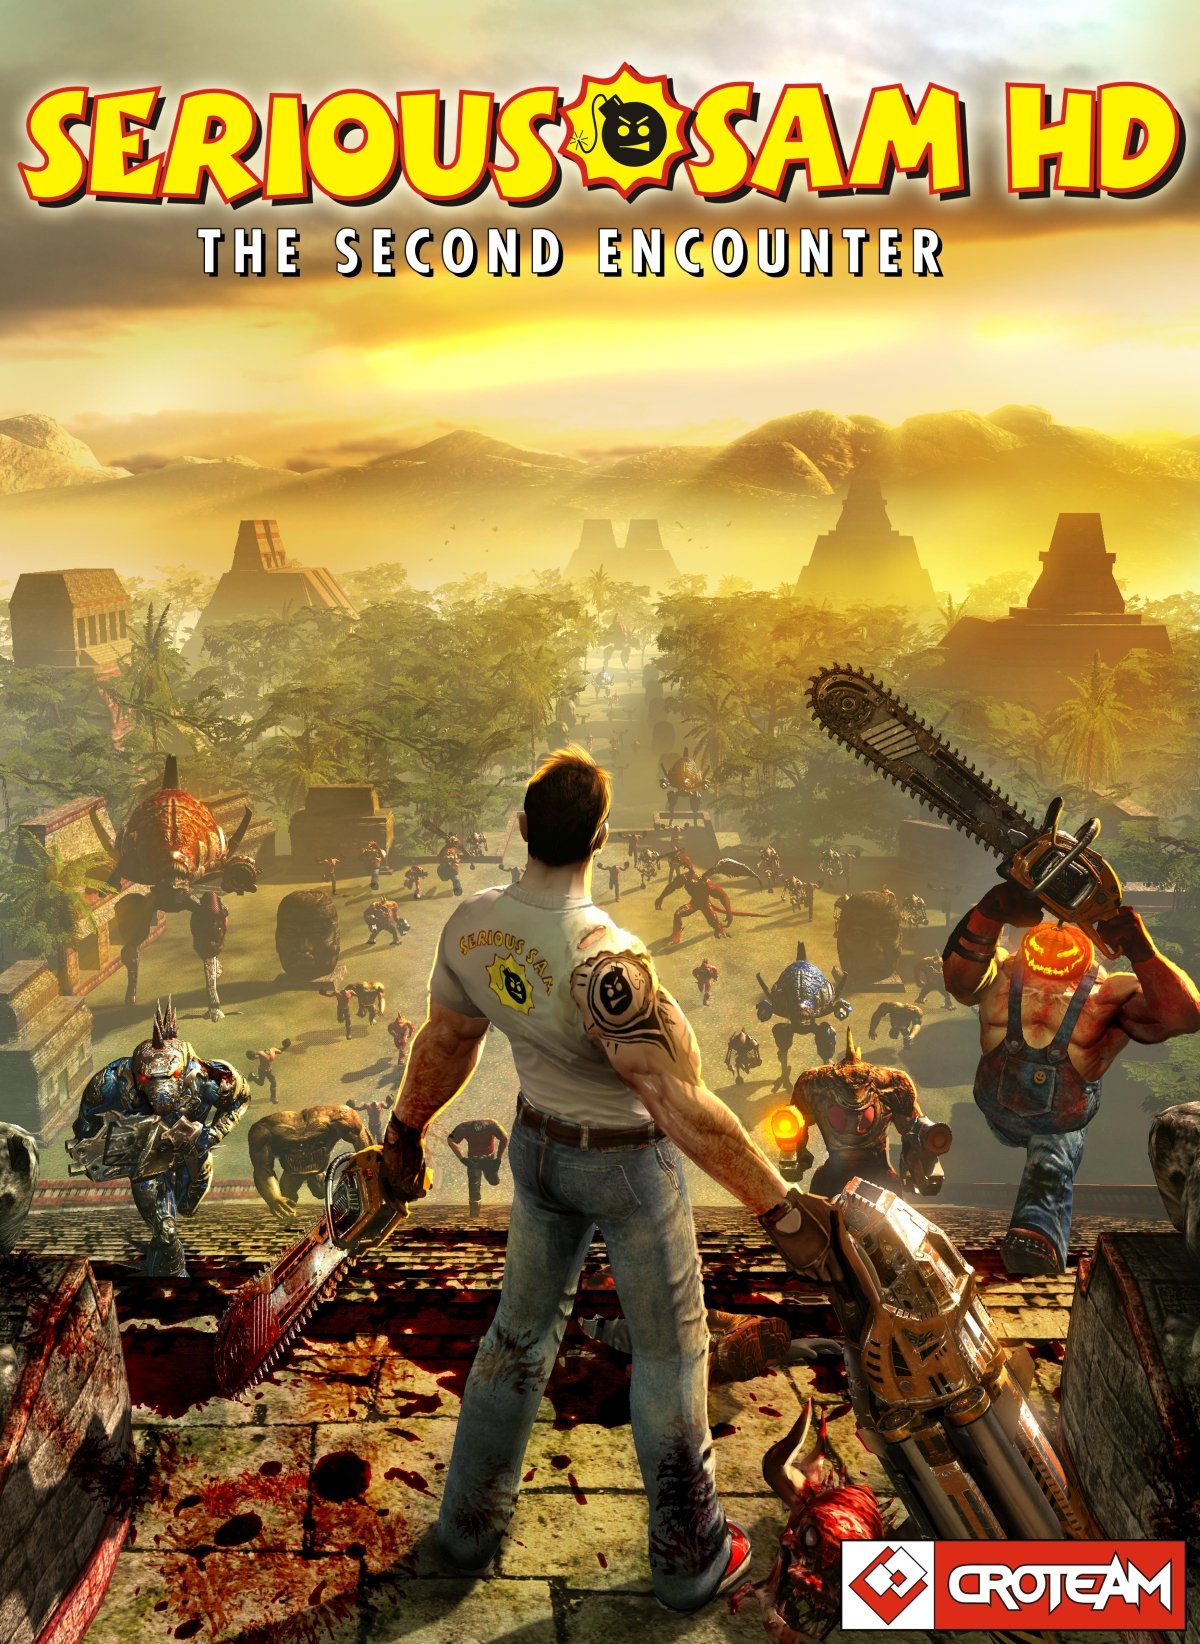 Image of Serious Sam HD: The Second Encounter